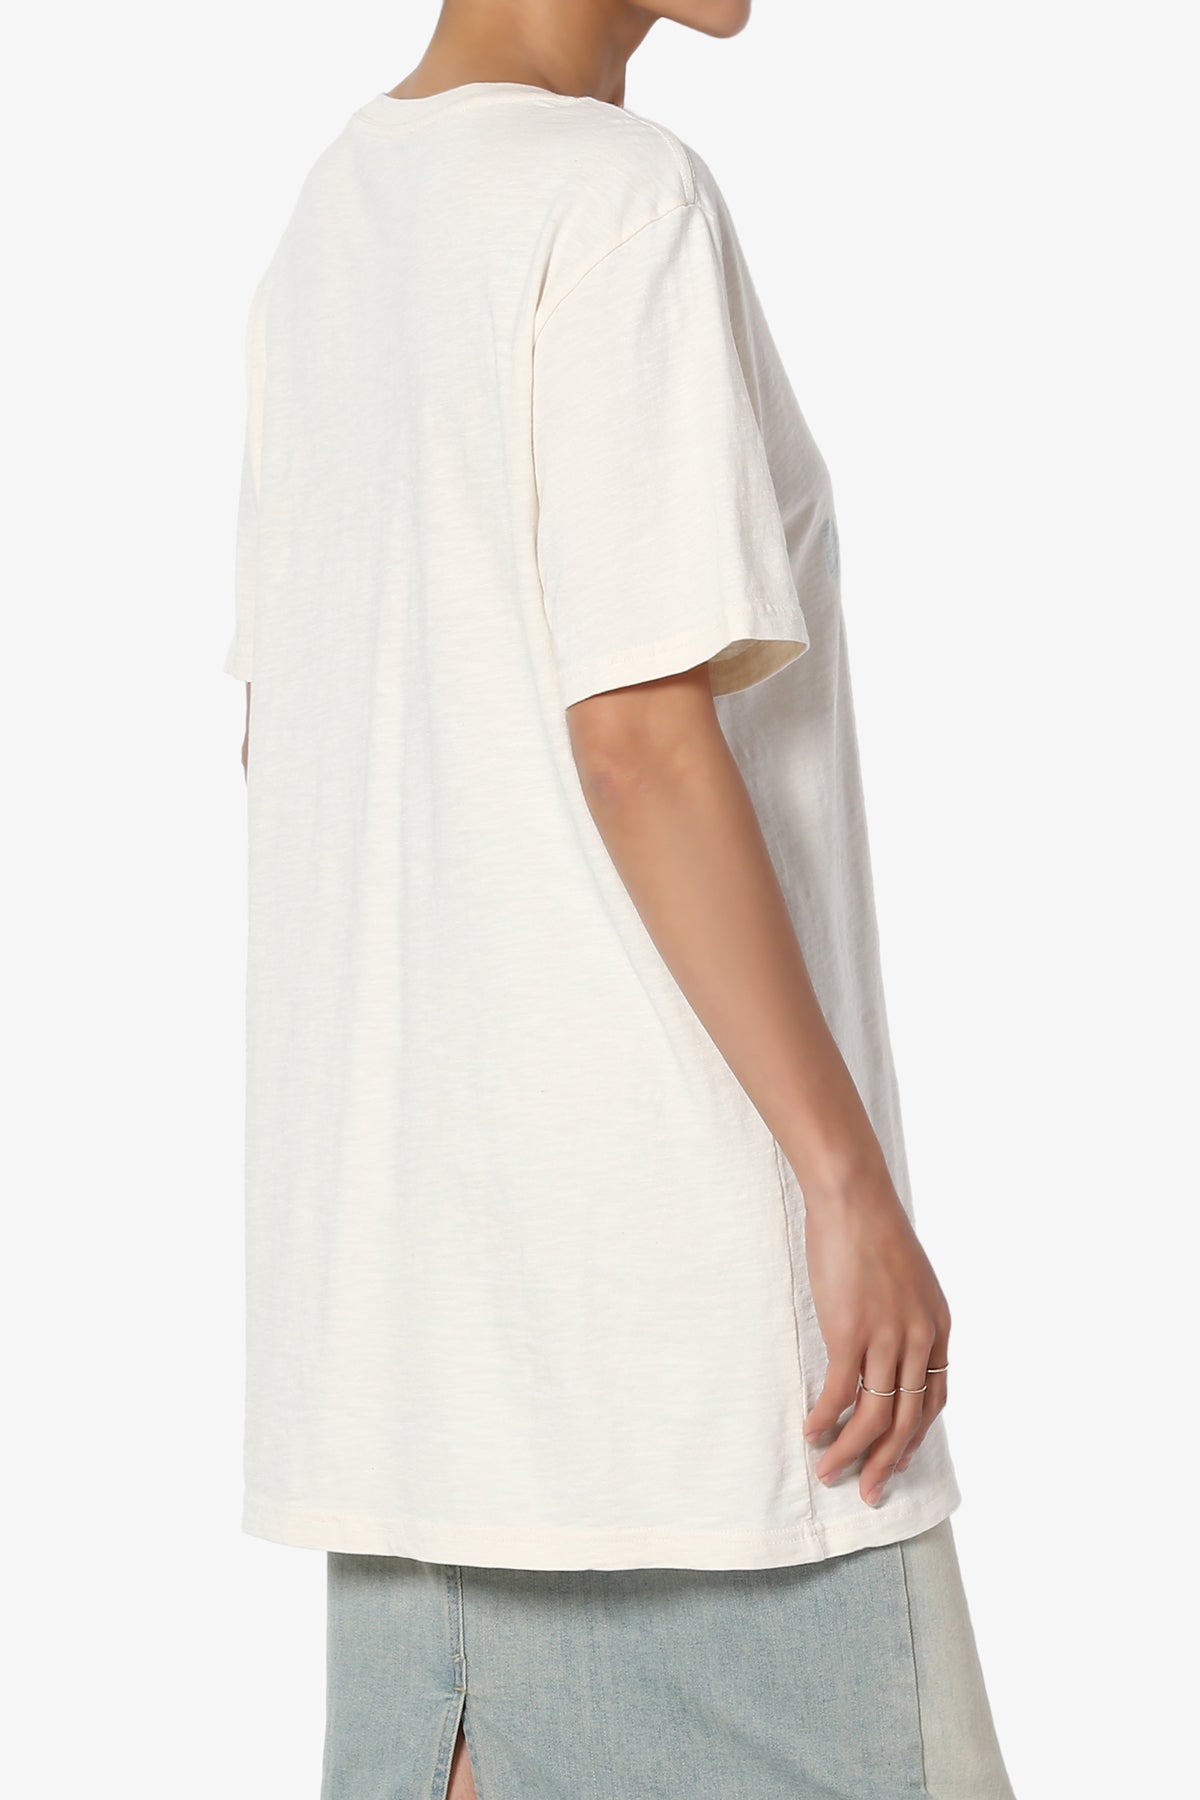 Load image into Gallery viewer, Korie Letter Print Short Sleeve Tee
